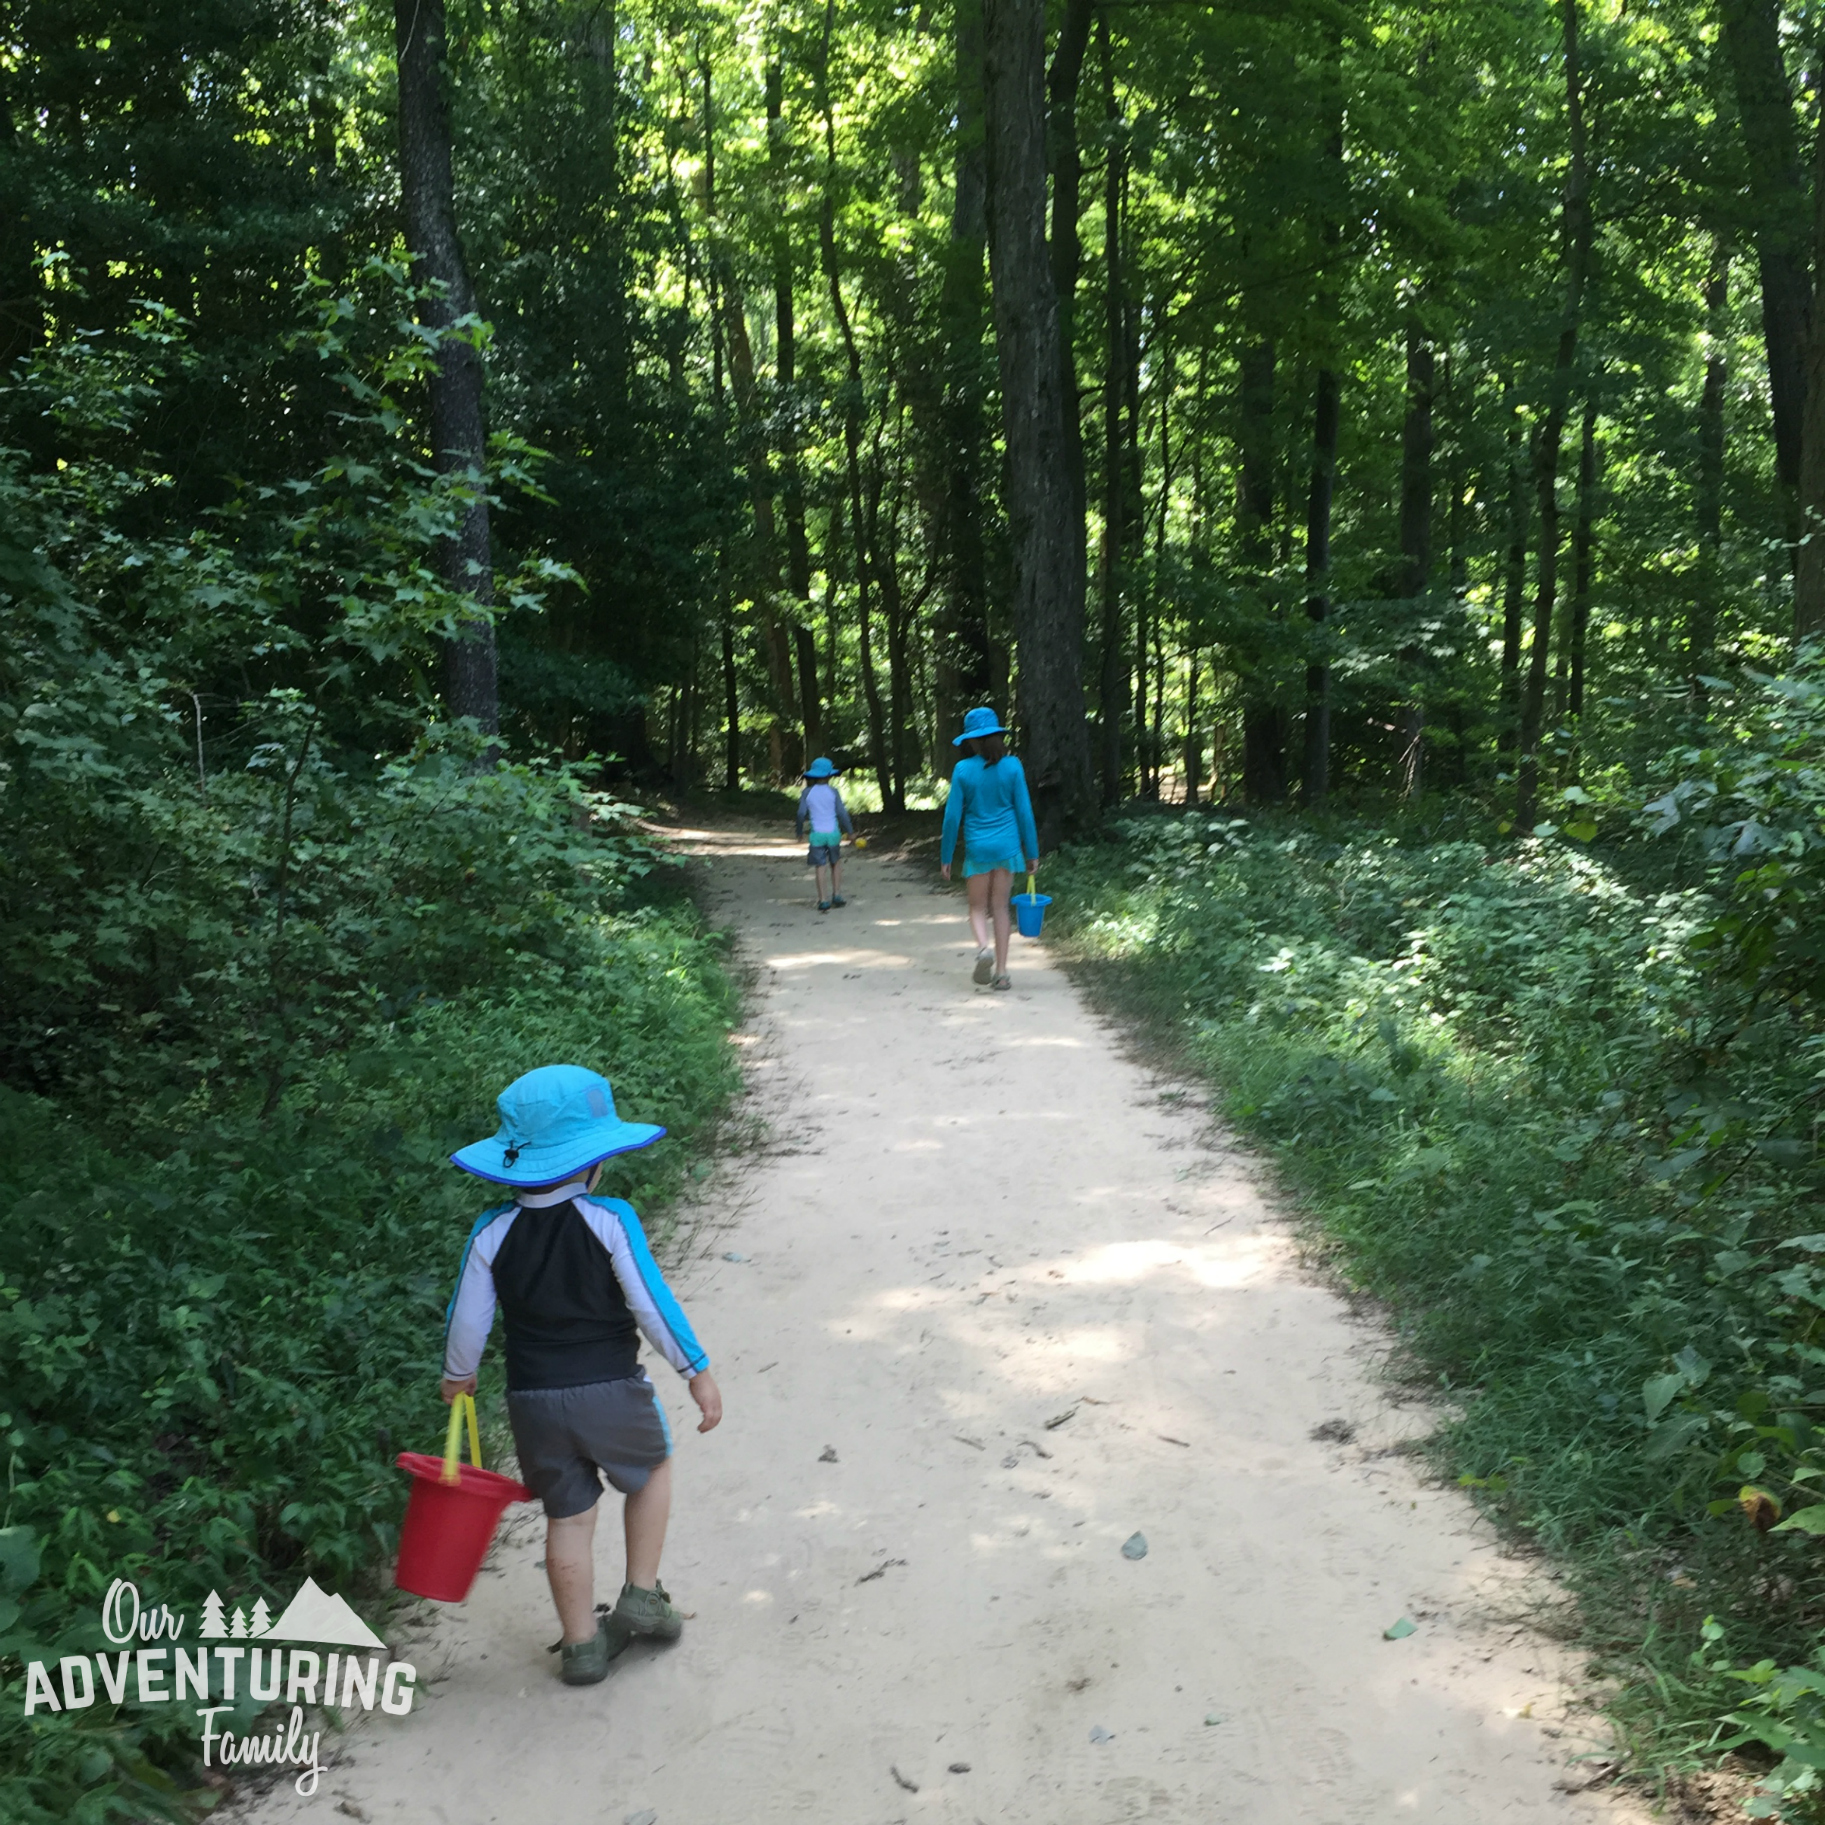 Heading to Colonial Beach VA on vacation? Don’t spend all your time at the beach! Go to ouradventuringfamily.com for 9 fun things to do near Colonial Beach.